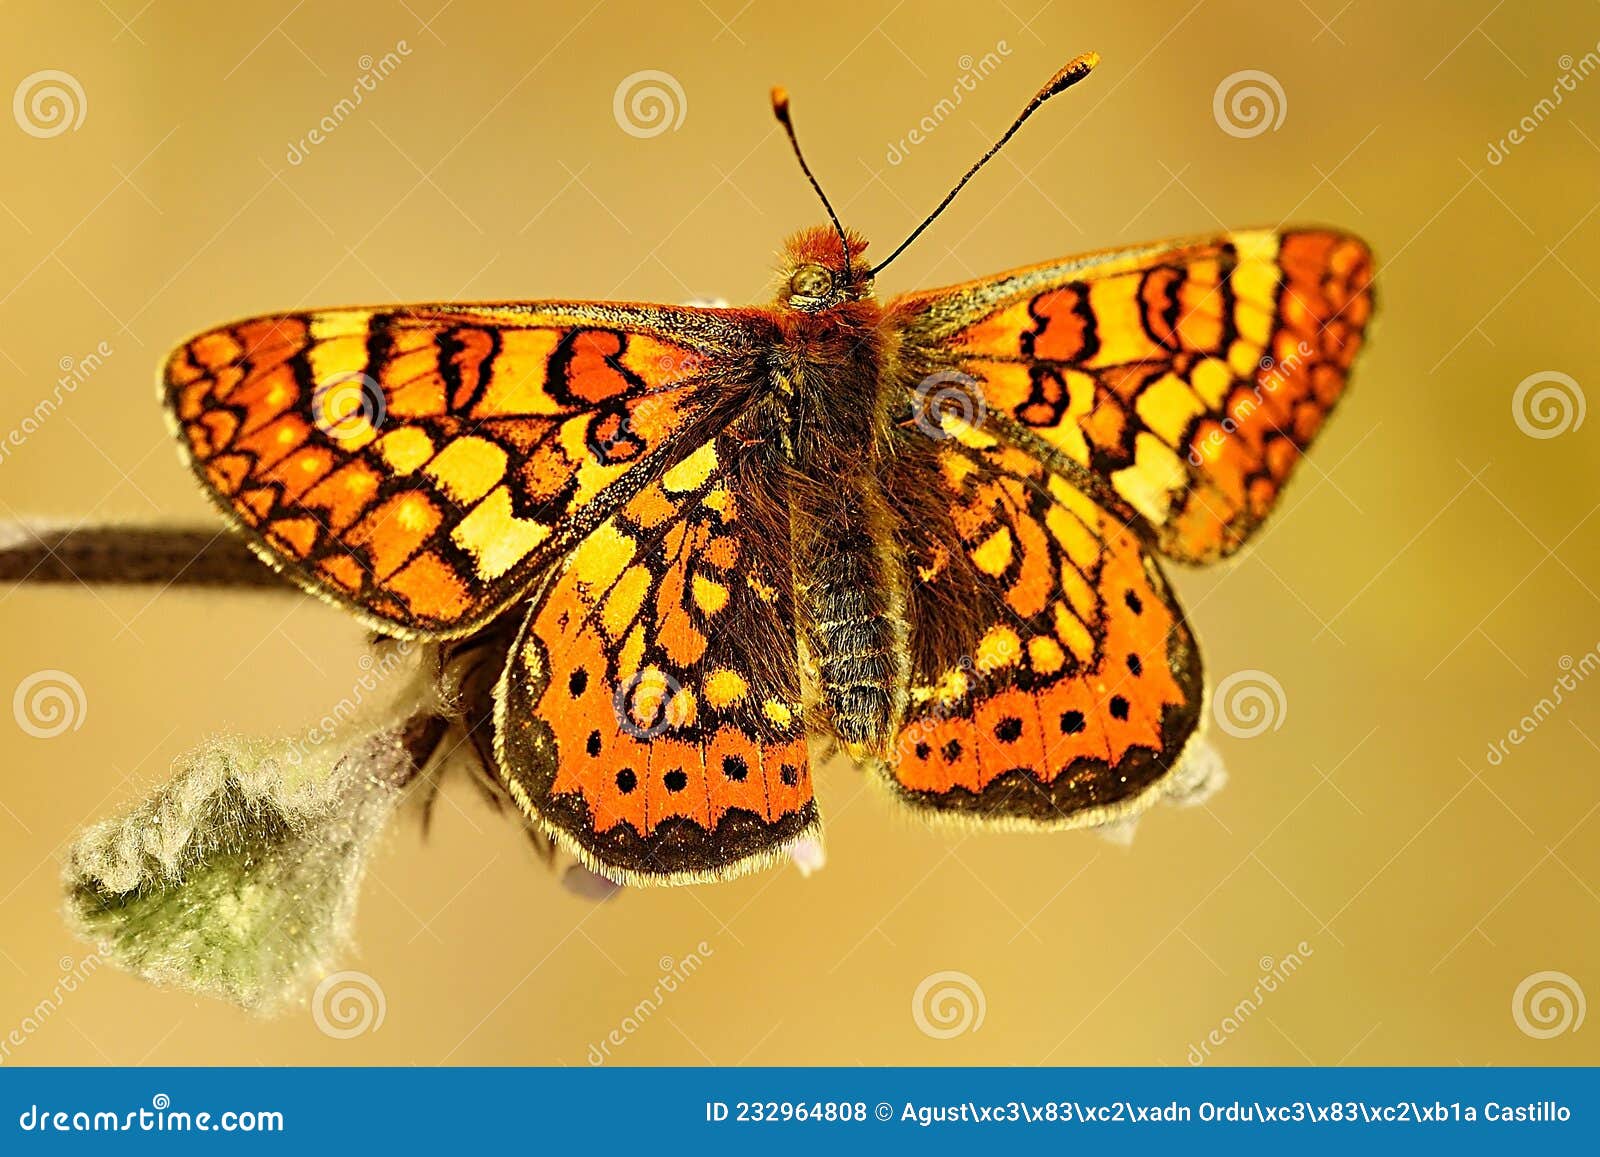 day butterfly perched on flower, euphydryas aurinia.